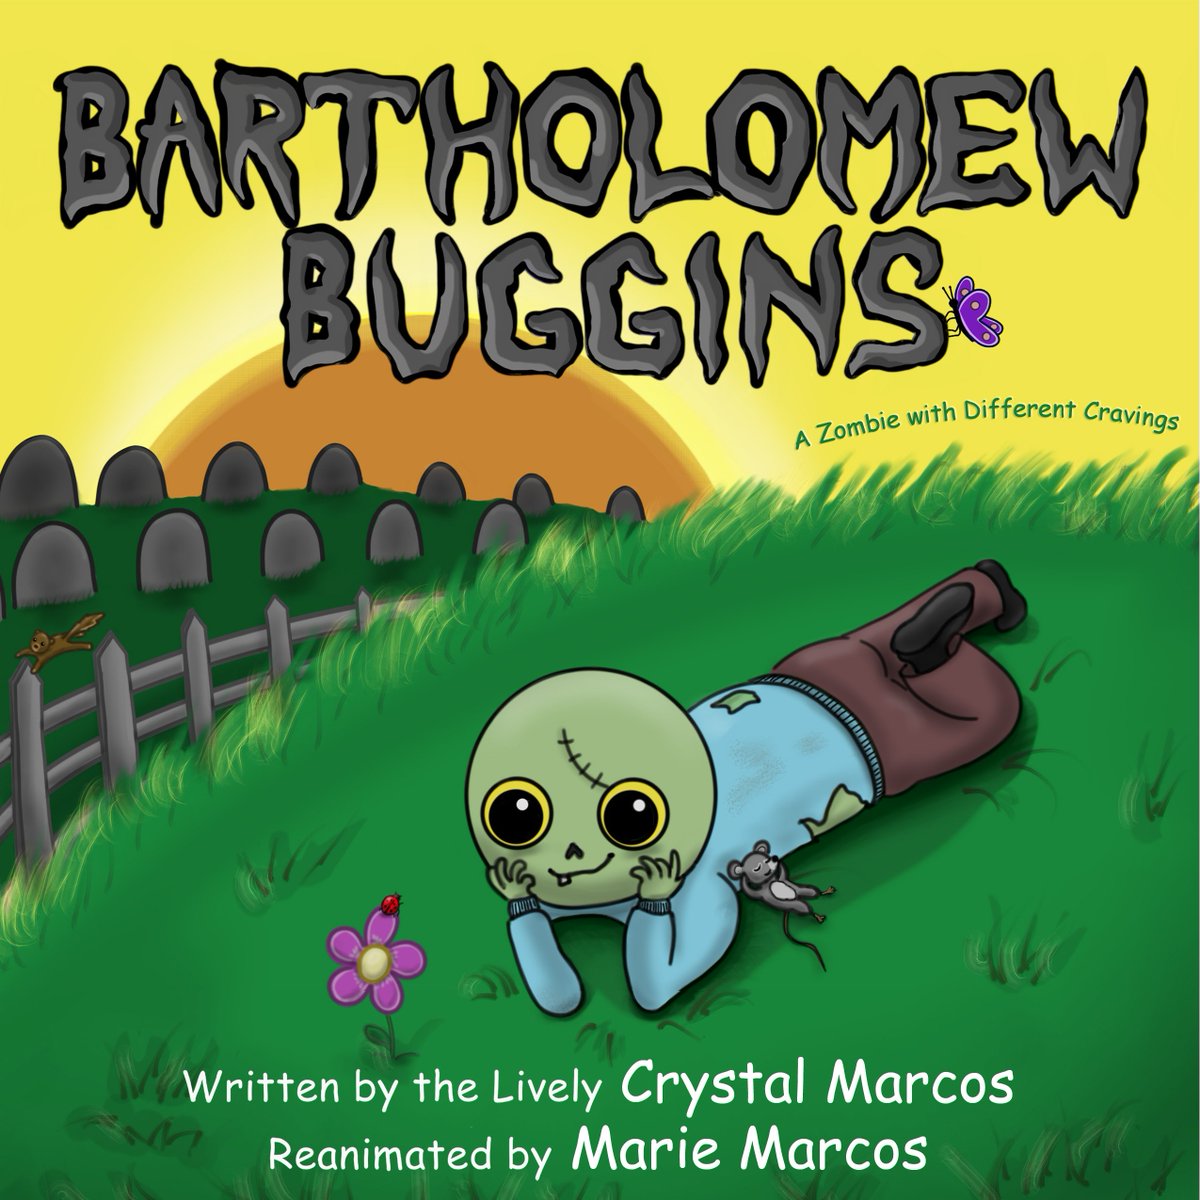 '5⭐️- Not since Dr. Seuss have I read such a delightful children's picture book (by @CrystalMarcos)!'

amzn.to/3UgeAo3

#fantasy #action #adventure #zombies #earlylearning #friendship #kindness #childrensbooks #rhymes #picturebooks #poems #books #ebooks #audiobooks